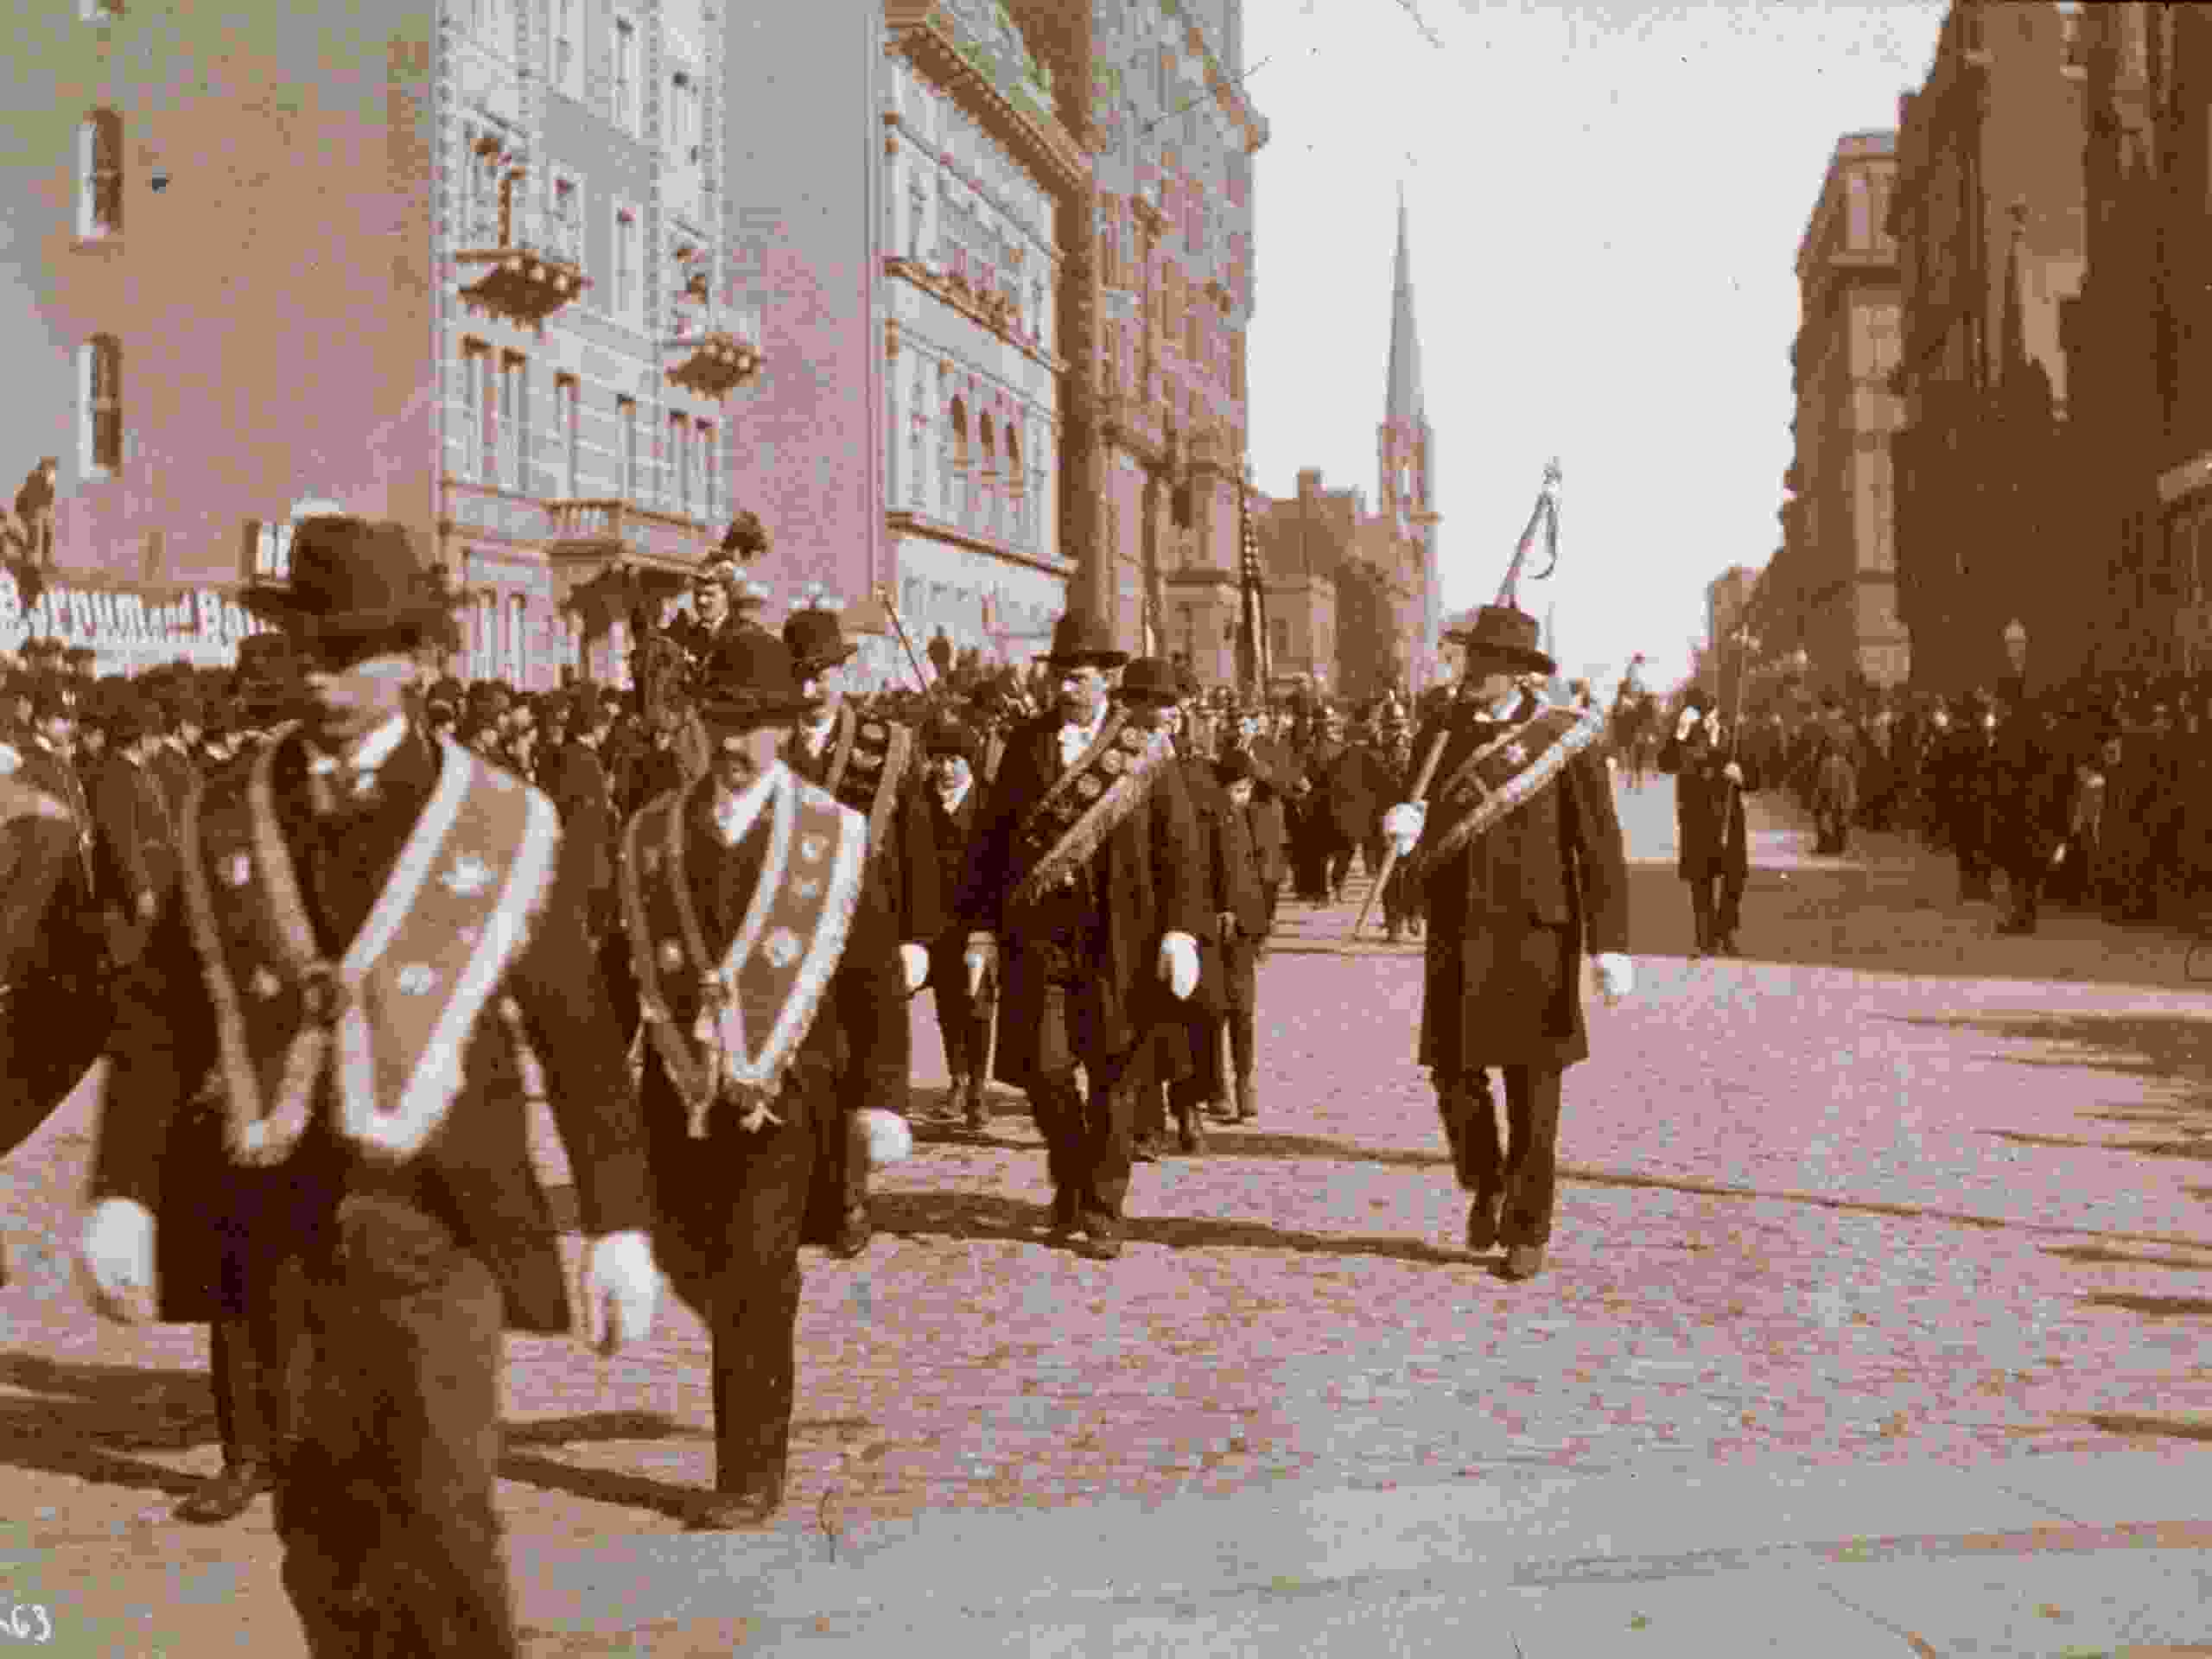 One of the very first images of a St. Patrick's Day parade.